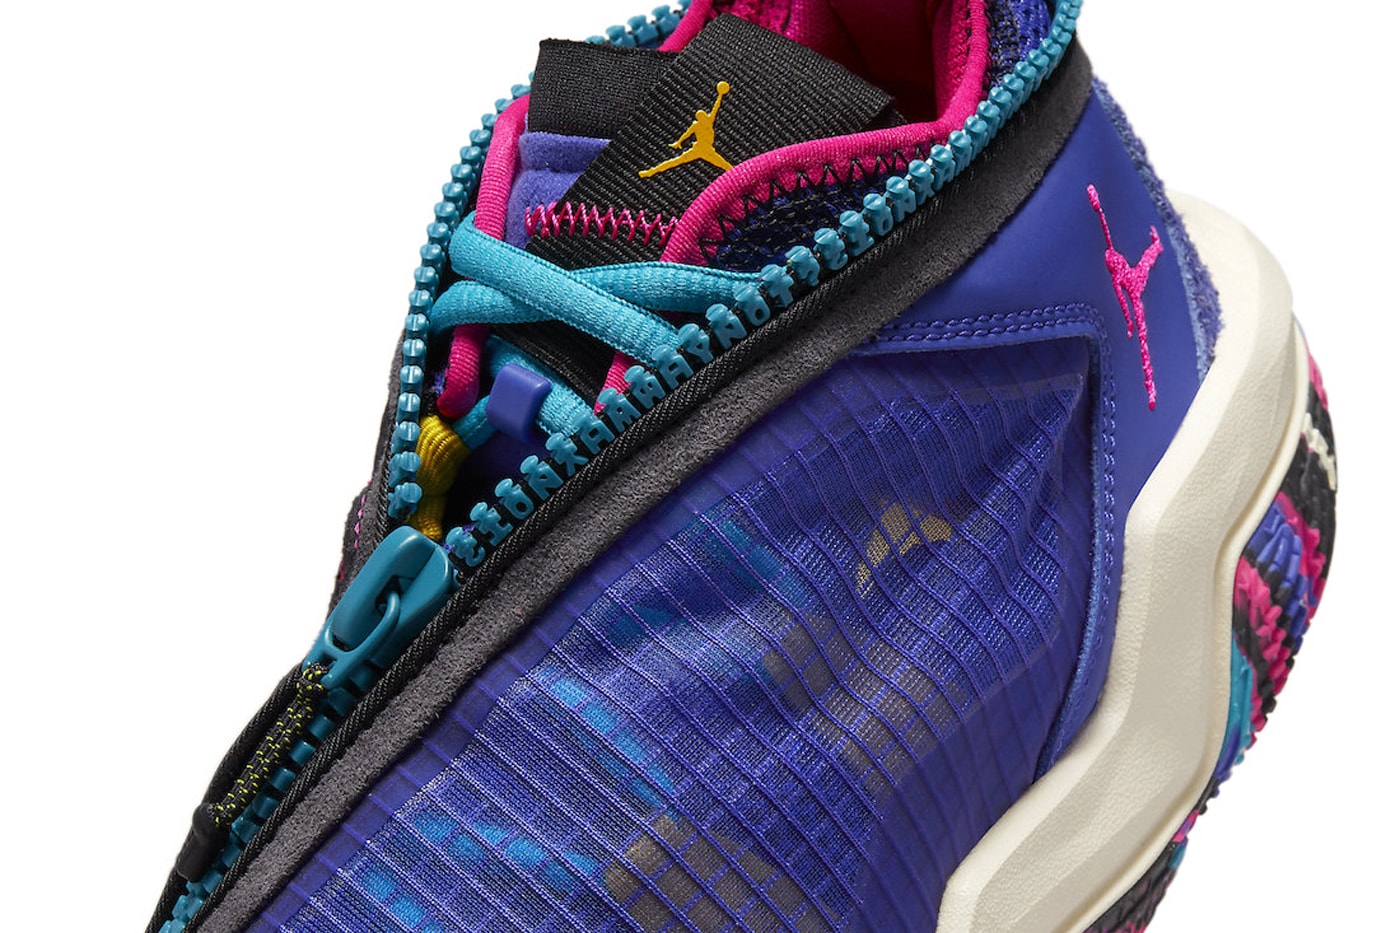 Official Look at the Jordan Why Not Zer0.6 "Bright Concord" russell westbrook DO7189-460 los angeles clippers nba basketball michael jordan brand nike swoosh Bright Concord/Pink Prime-Black-Vivid Sulfur-Aquatone-Coconut Milk